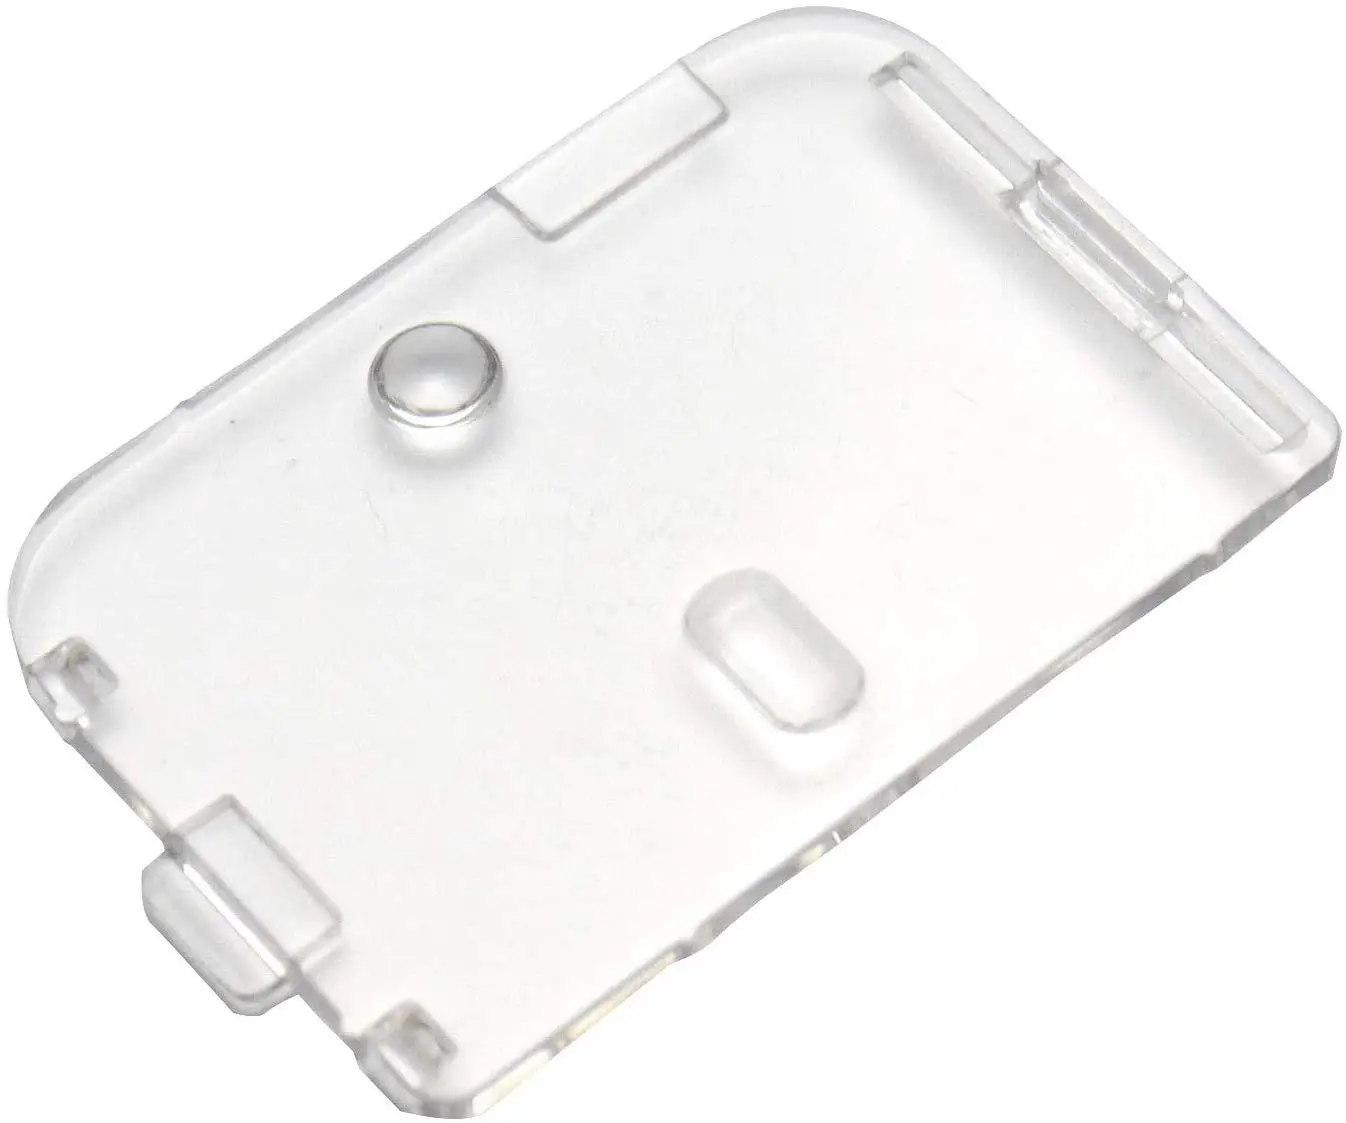 CE-100 7469 7470 Sew-link Cover Plate for Singer 7468